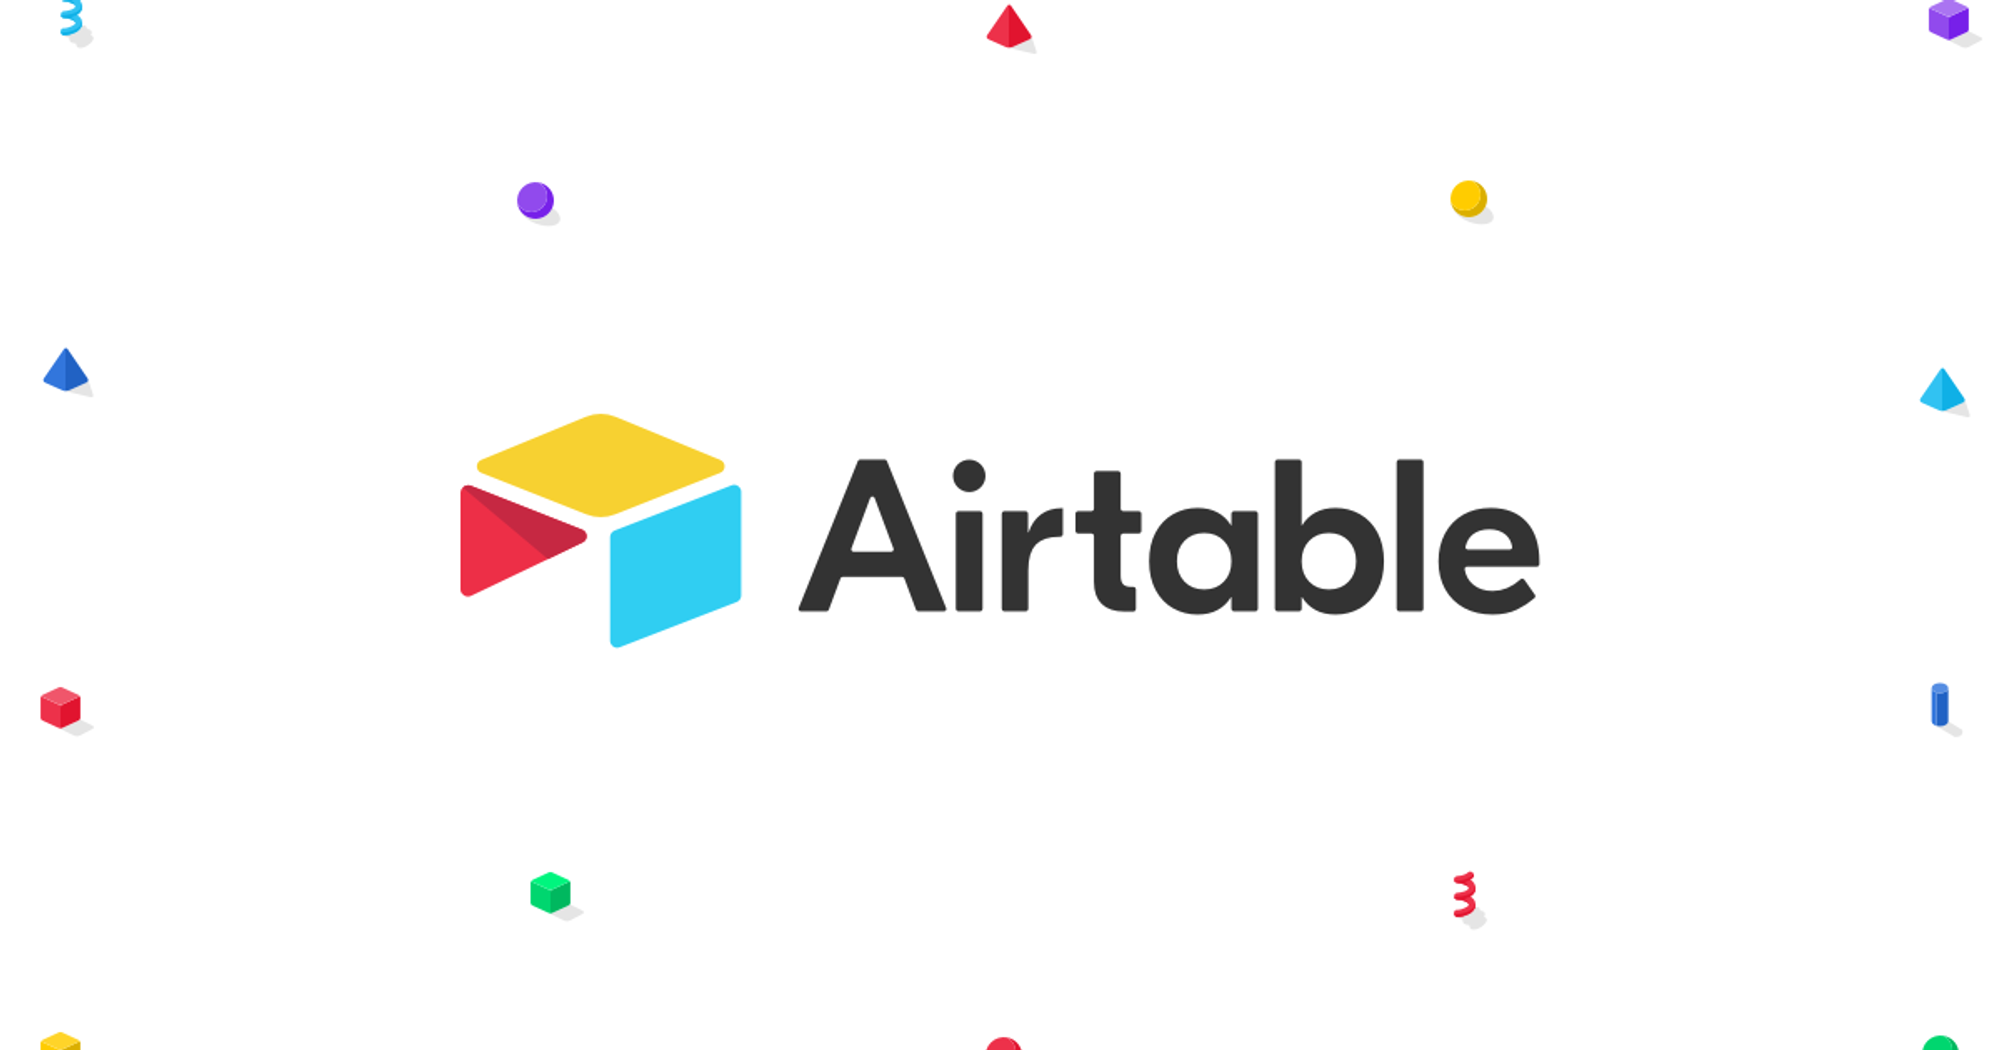 Unly Releases an Open Source Software for “Airtable Managed backups”